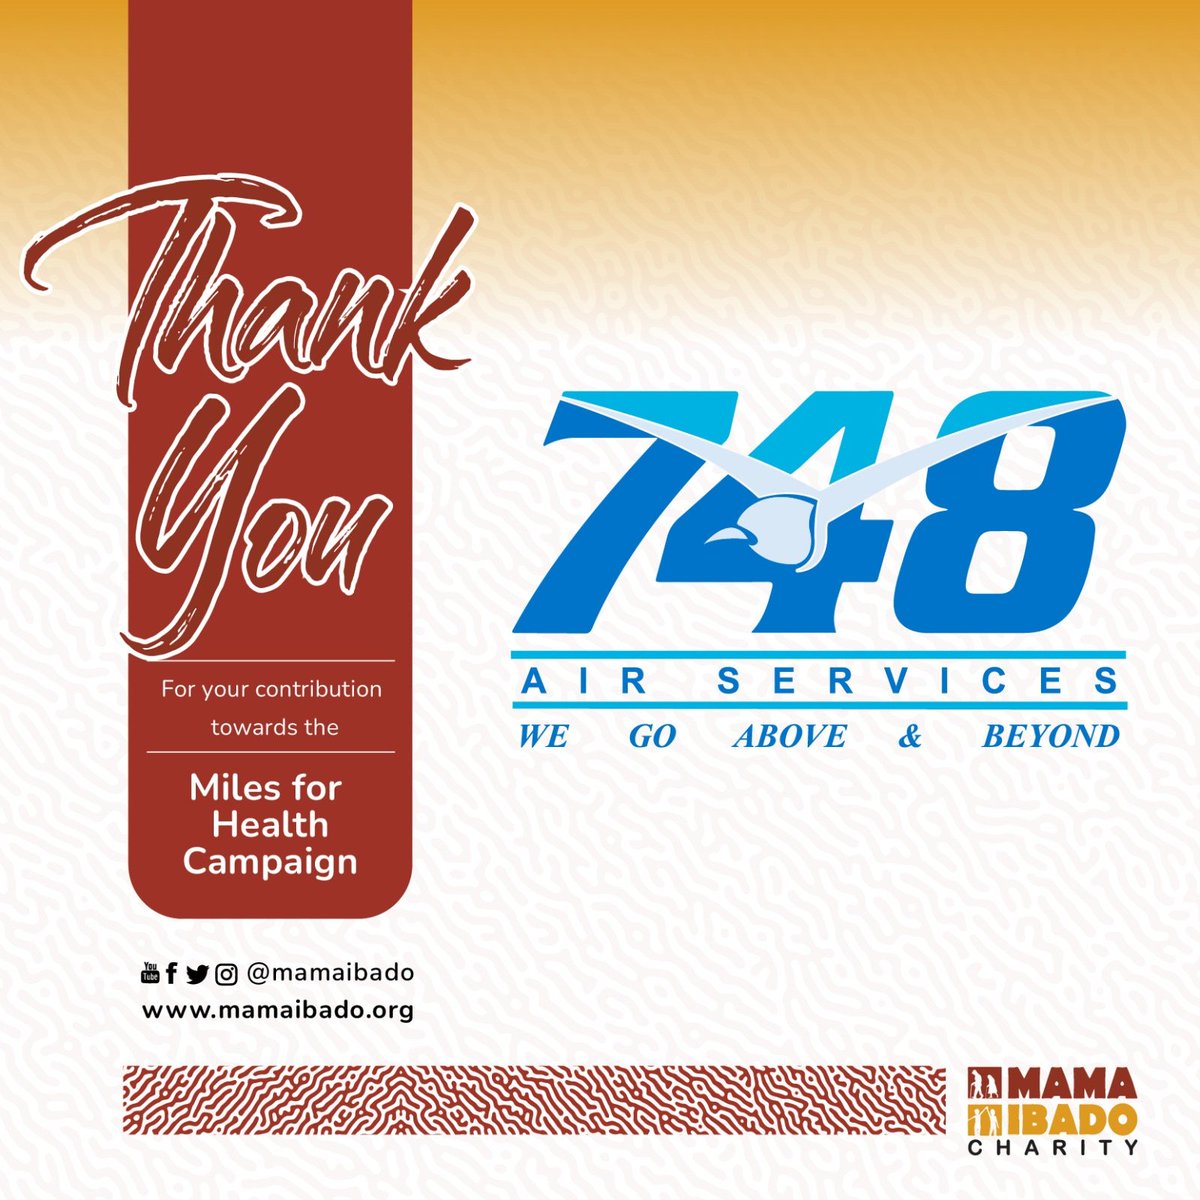 🙏 Thank you, 748 Air Services, for your generous contribution to our Miles for Health Campaign! Your support will significantly impact the lives of many seniors, granting them access to essential healthcare services in their golden years.